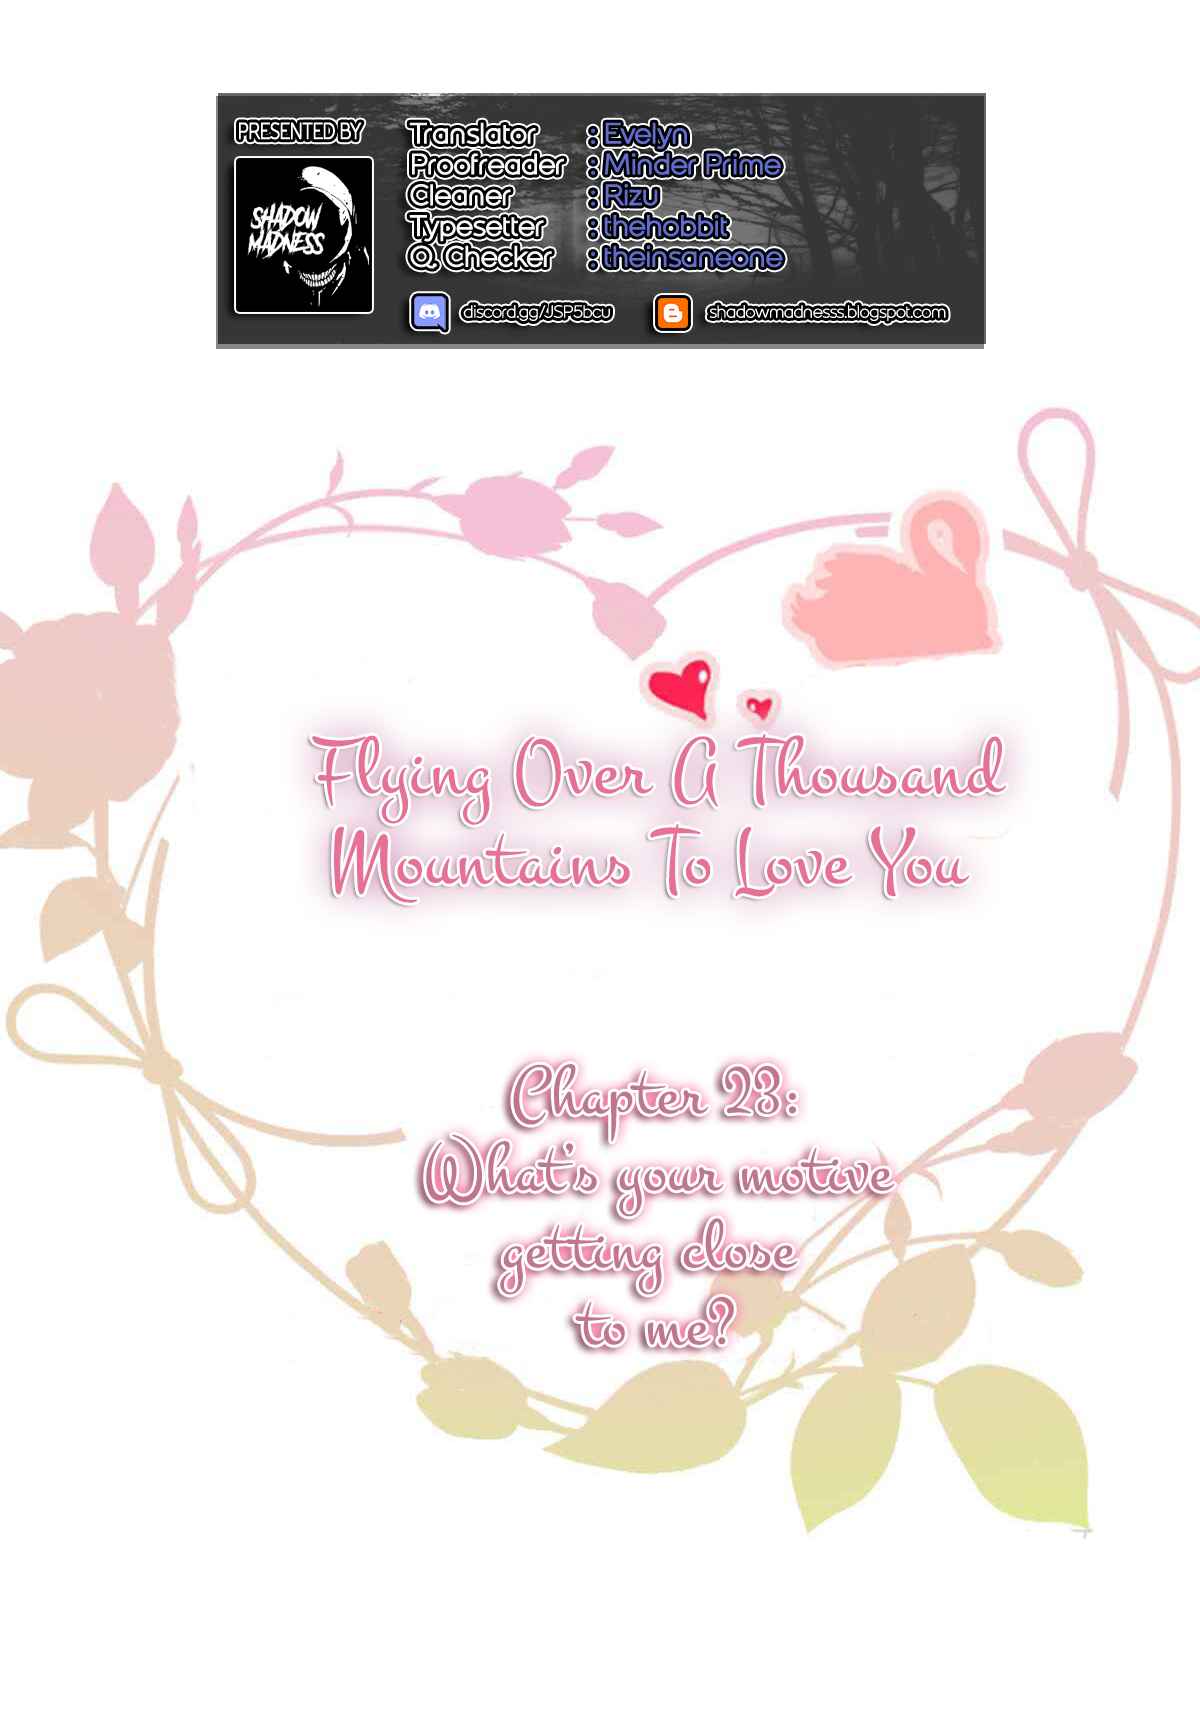 Flying Over a Thousand Mountains to Love You Ch. 23 What is your motive in getting close to me?